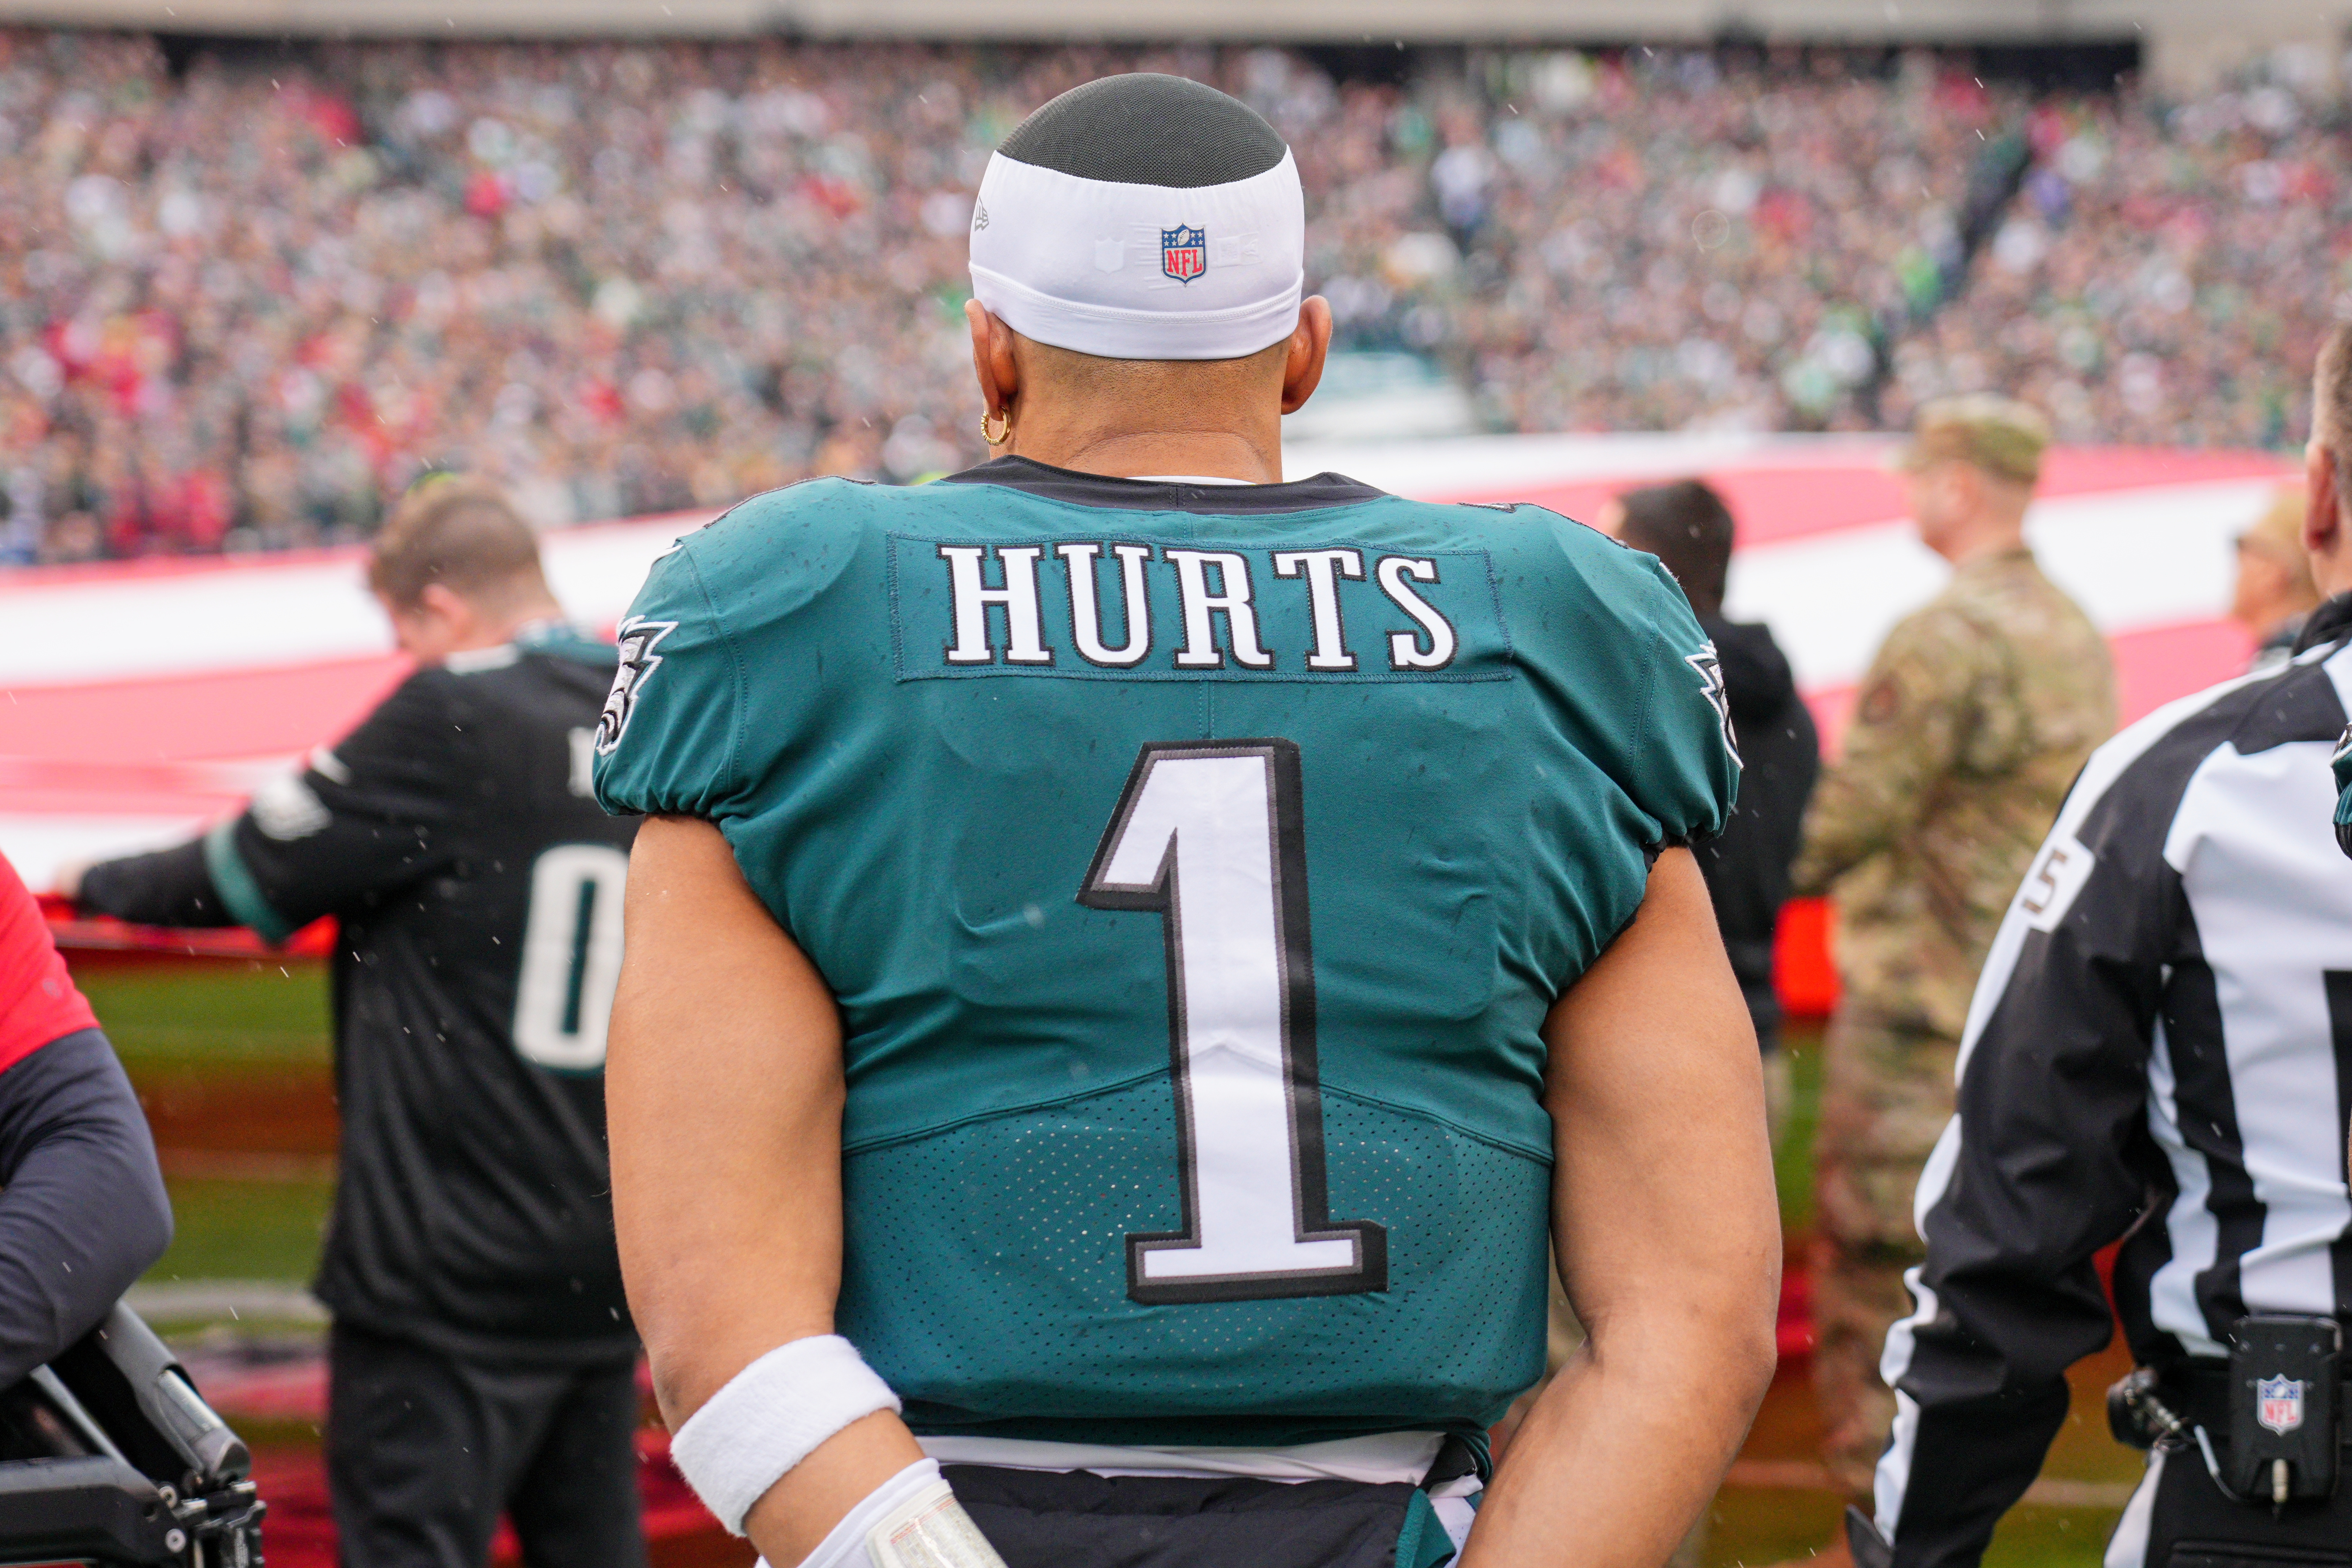 Philadelphia Eagles quarterback Jalen Hurts (1) looks on during the Championship game between the San Fransisco 49ers and the Philadelphia Eagles on January 29, 2023.